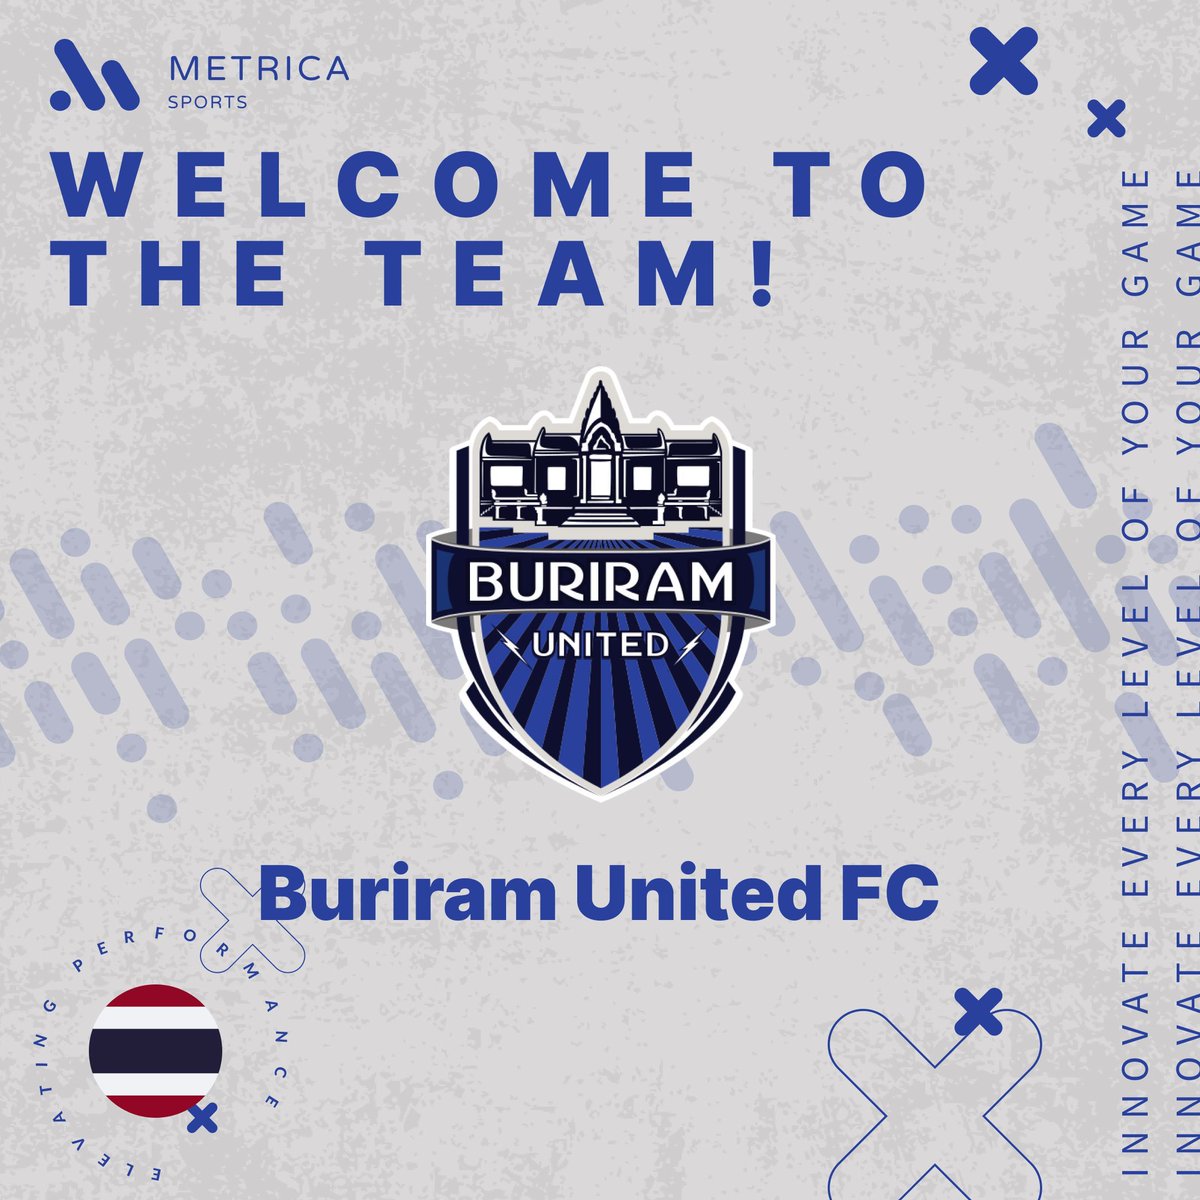 We are proud to enhance the performance of teams all over the world. It is a pleasure to welcome Buriram United FC. ⚽ It is the first Thai team which won and defended all the three trophies: championship, FA Cup and League Cup. 🏆 #buriramunited #buriram #football #thaileague